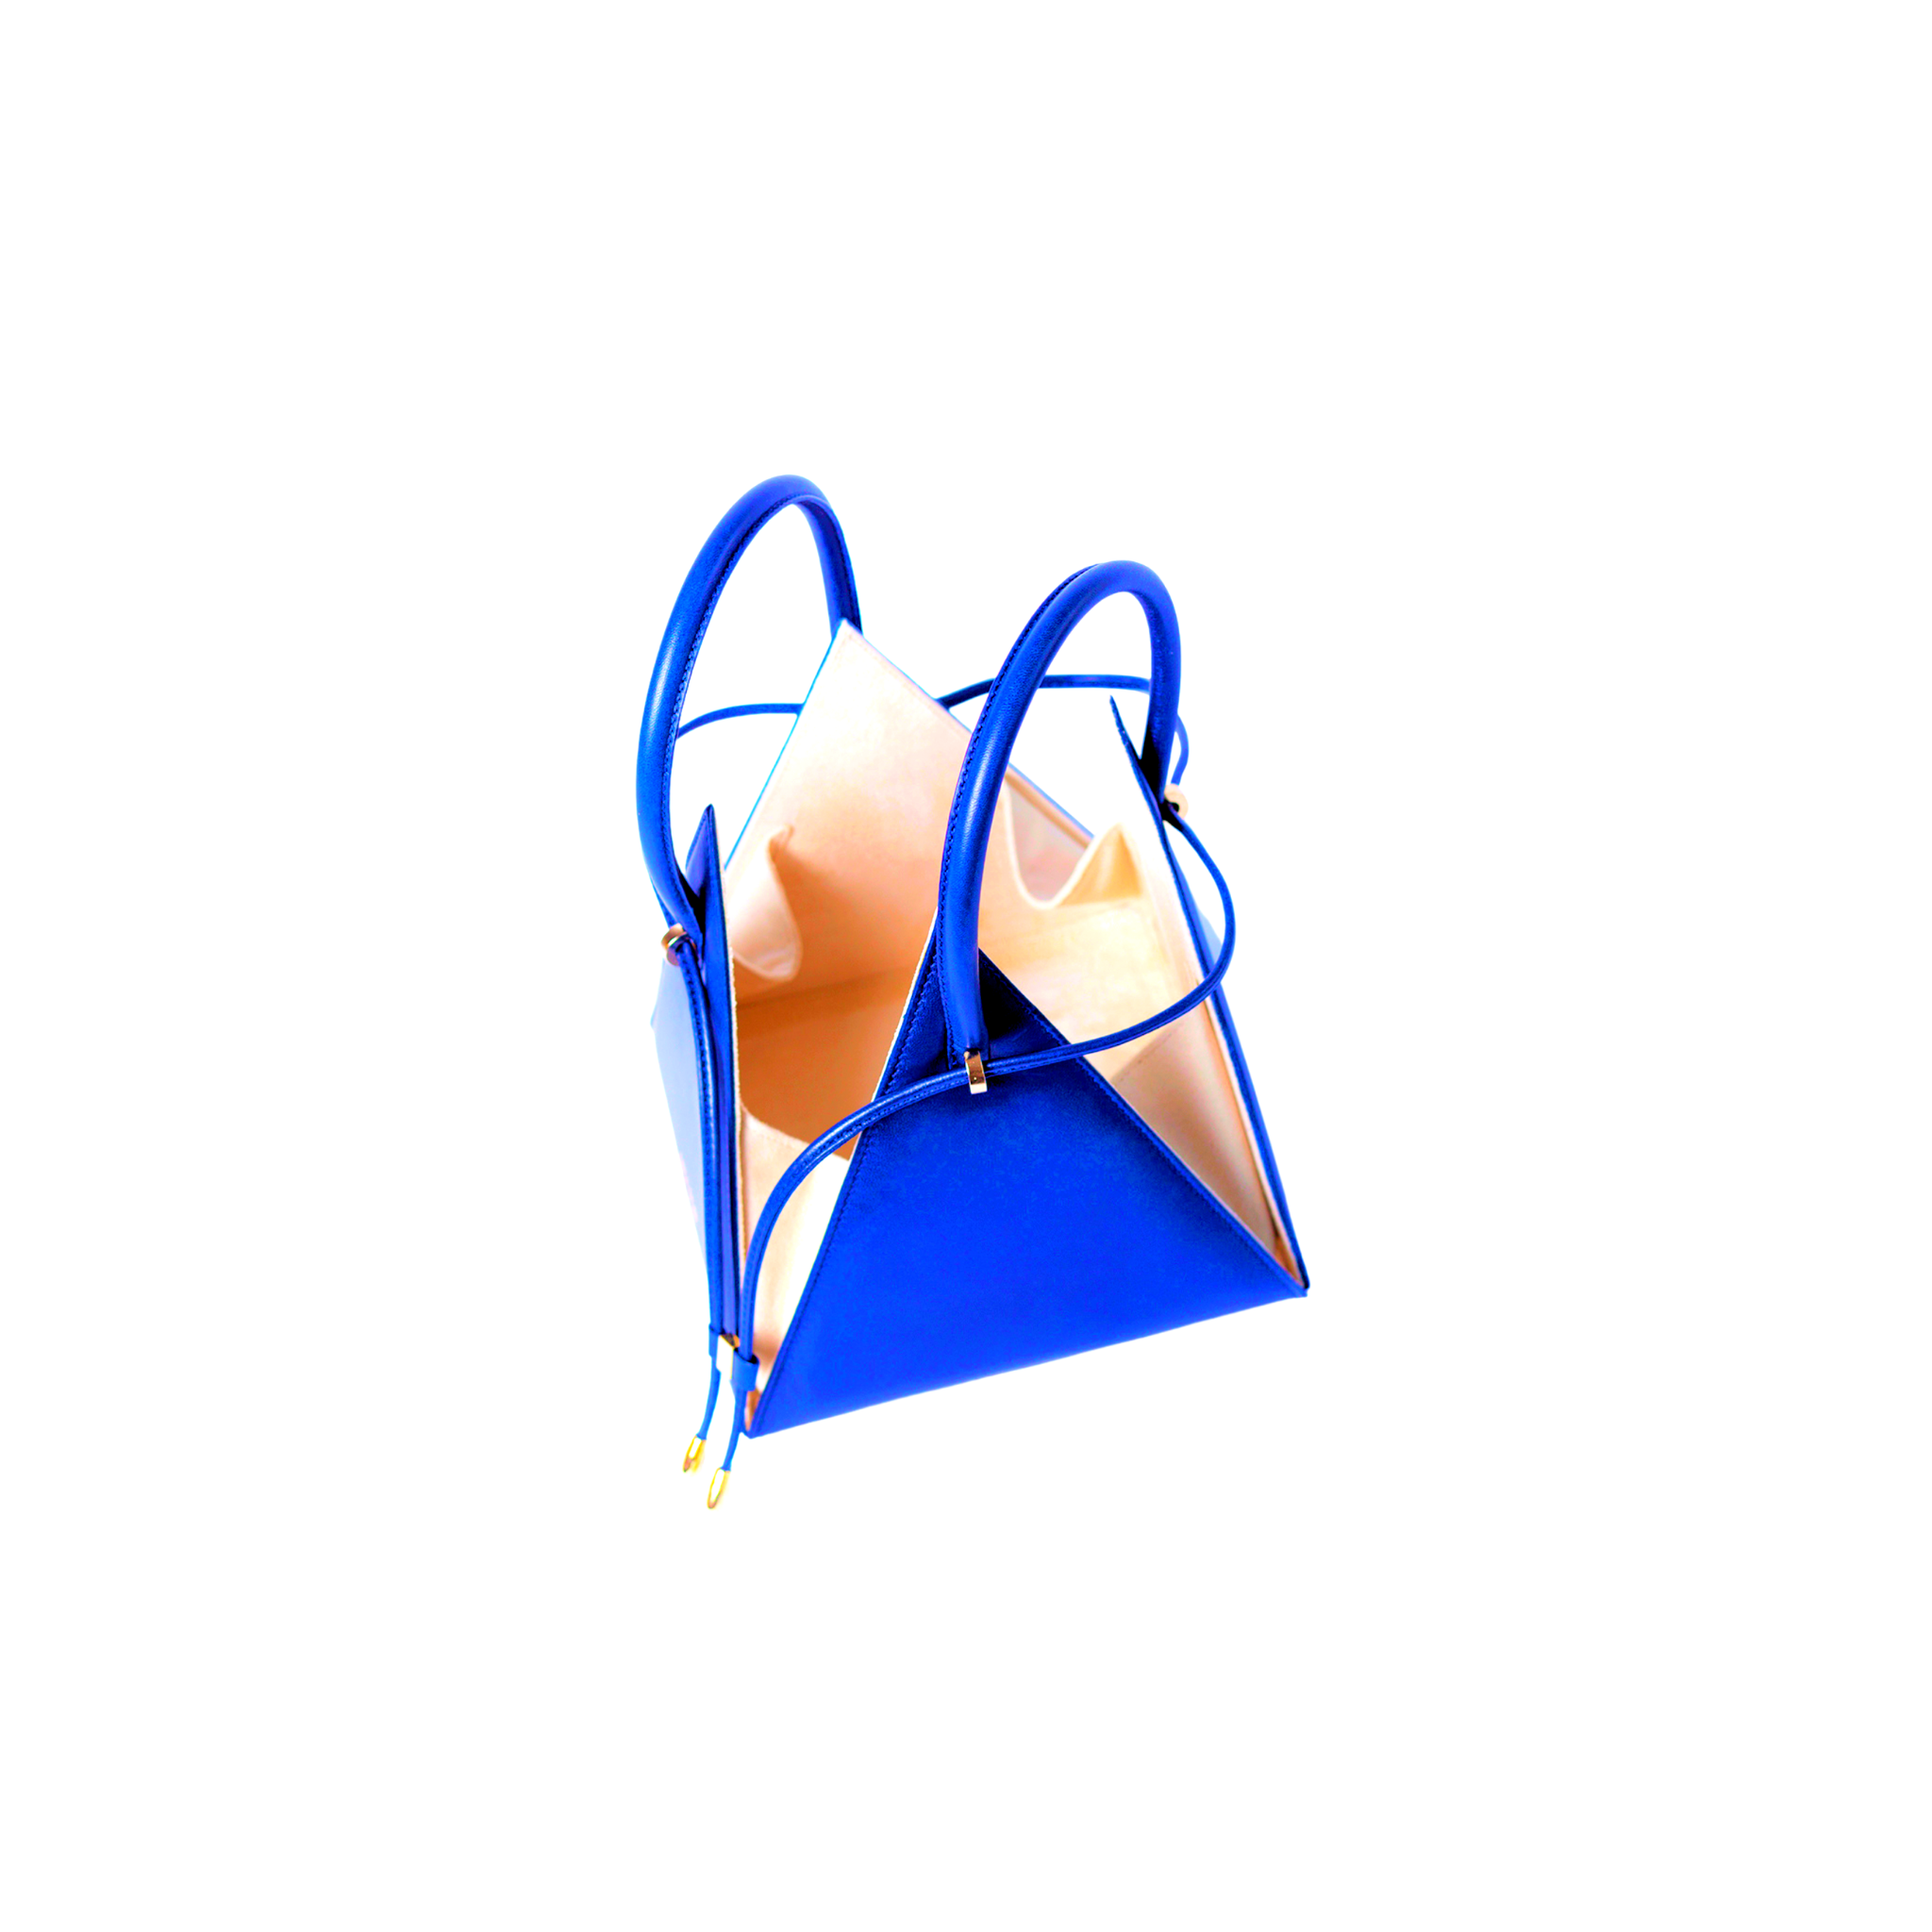 Buy now the Iconic LIA Mini bag inspired by the geometric shapes of our designer's birth city Barcelona, and its world known artist, Antonio Gaudí, architect of the world wonder La Sagrada Familia. The Iconic Lia Electric Blue Mini bag has a unique and functional pyramidal design able to fit all your essentials. 